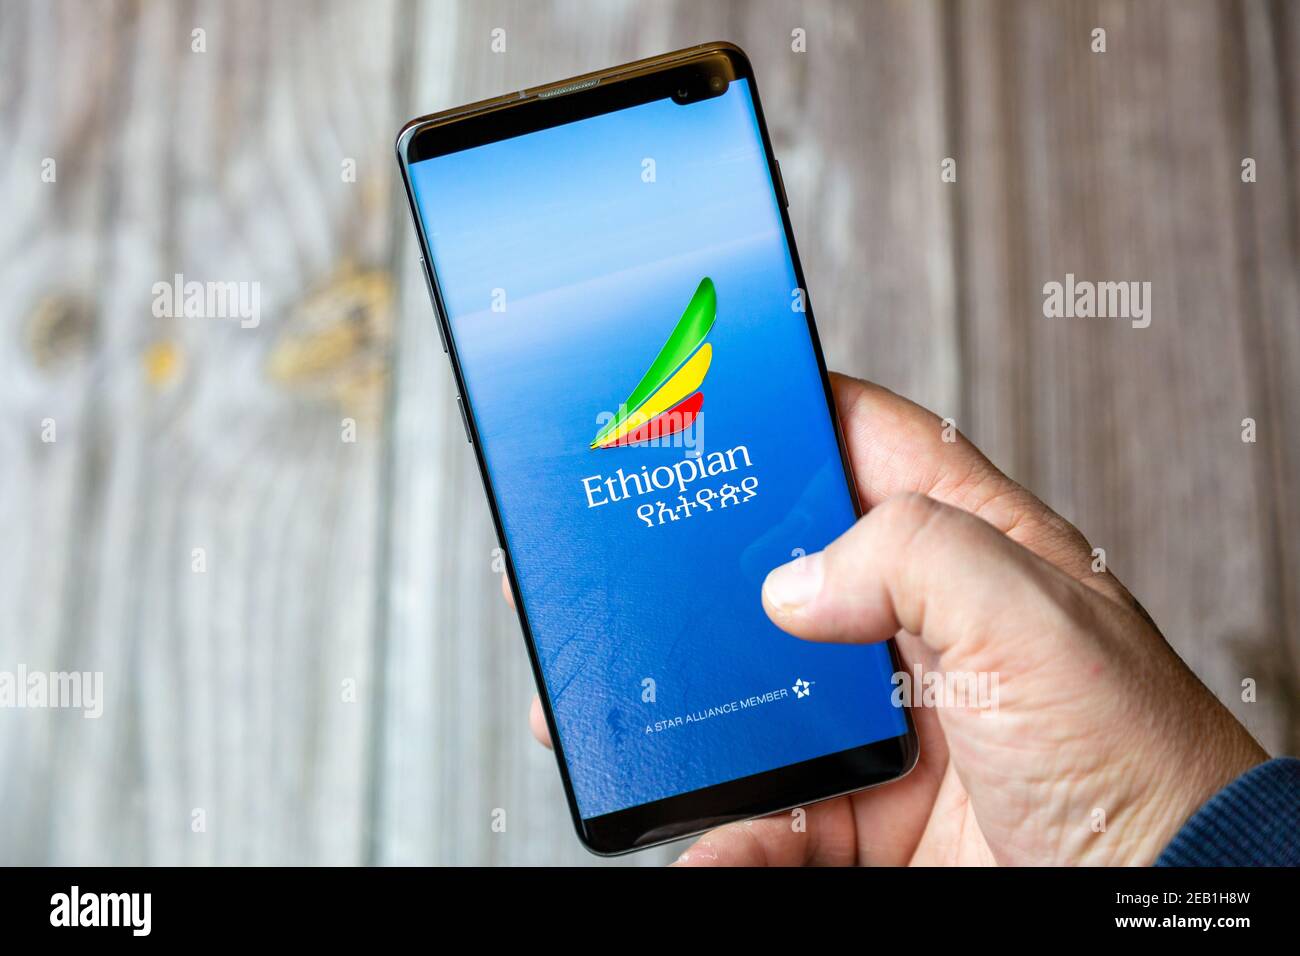 A mobile phone or cell phone being held by a hand with the ethiopian airlines app open on screen Stock Photo